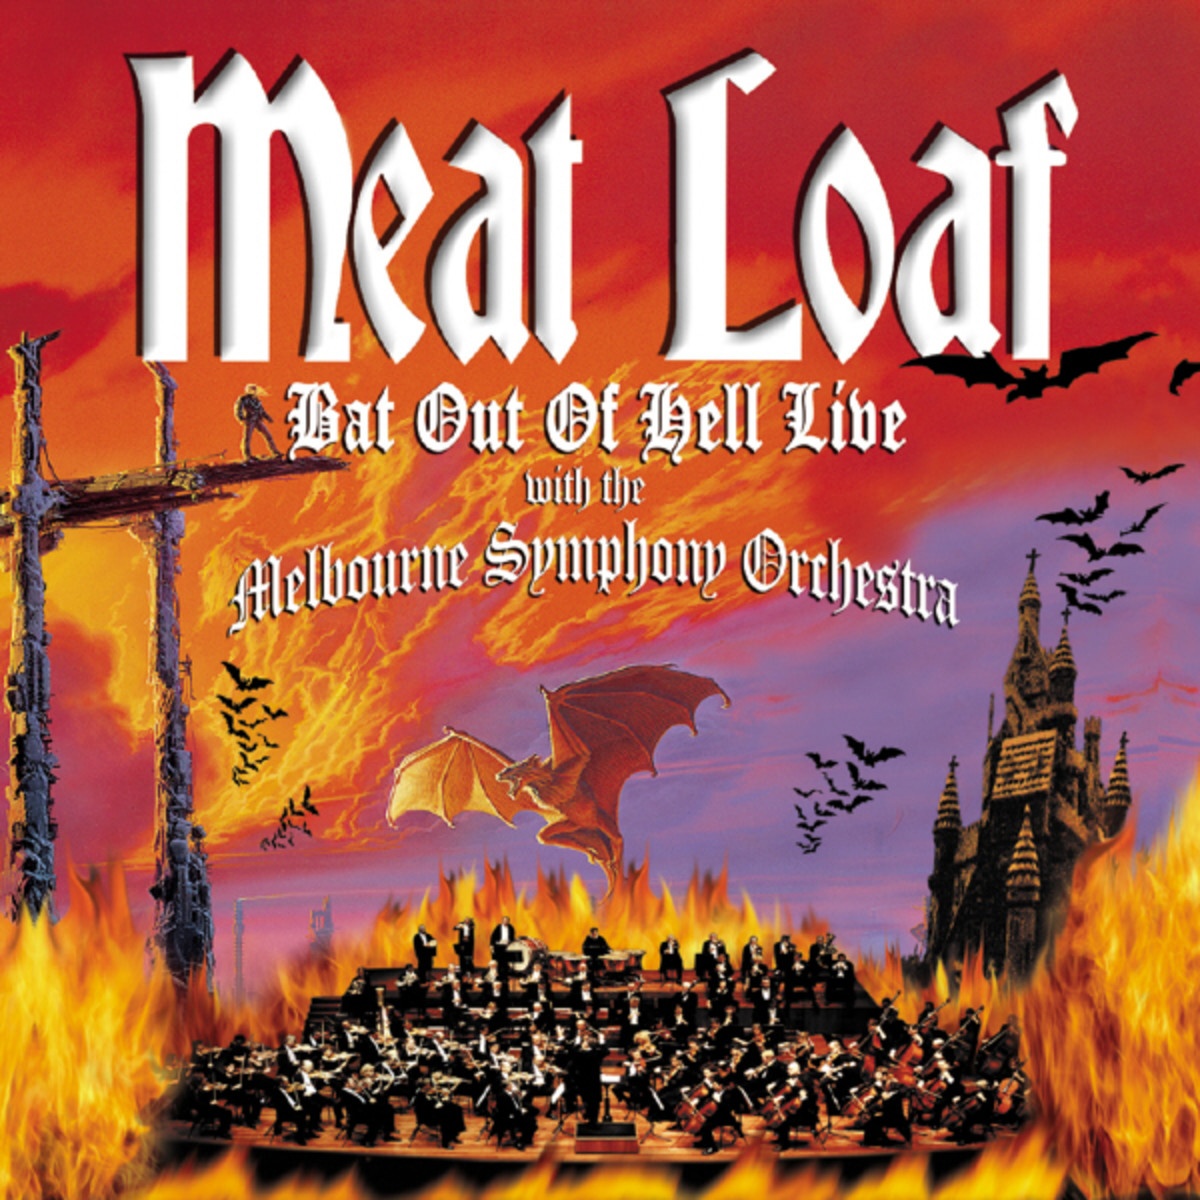 Bat Out Of Hell Live with The Melbourne Symphony Orchestra